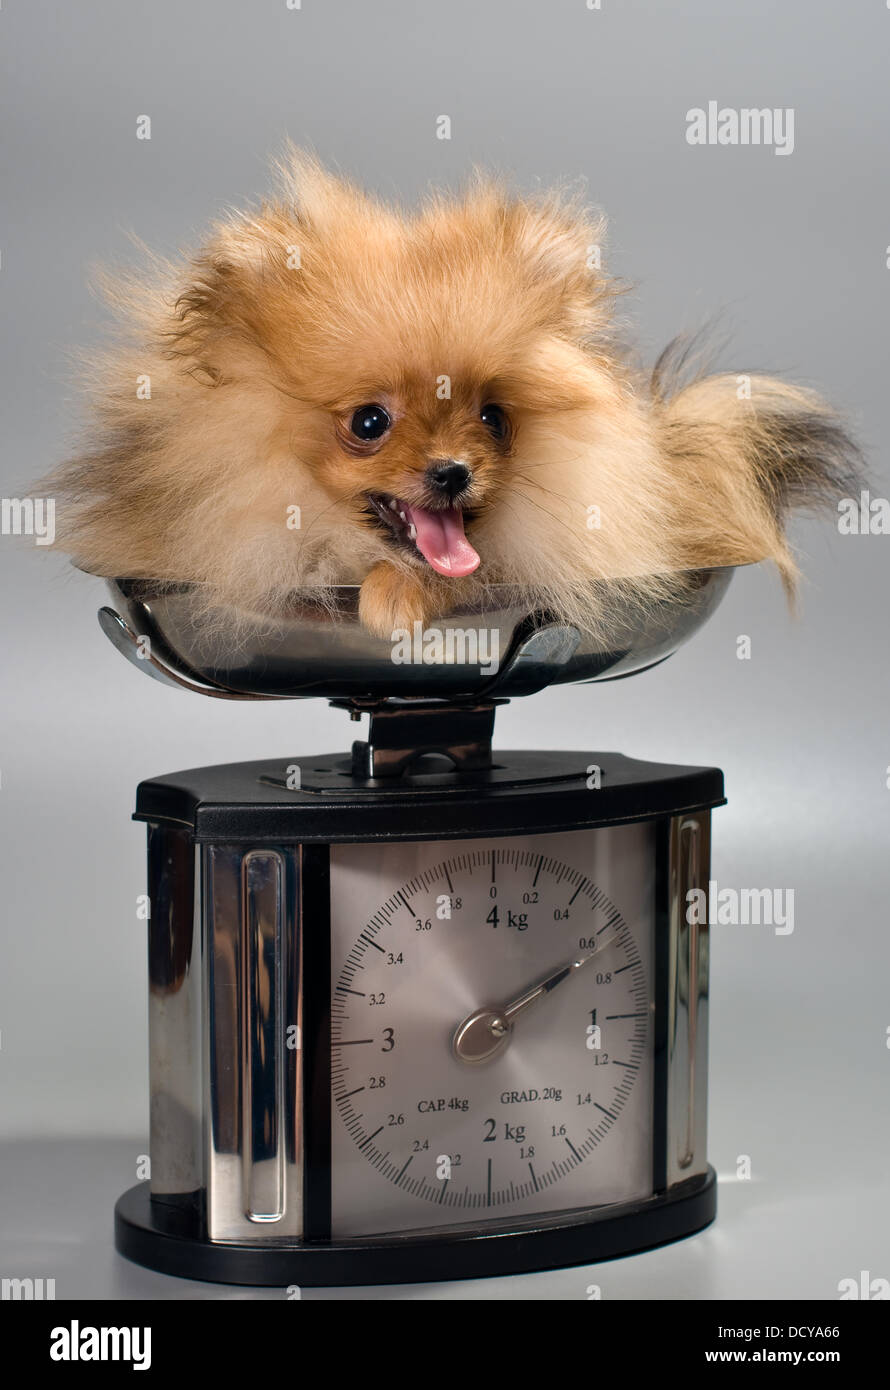 Miniature Spitz at the weigh Stock Photo